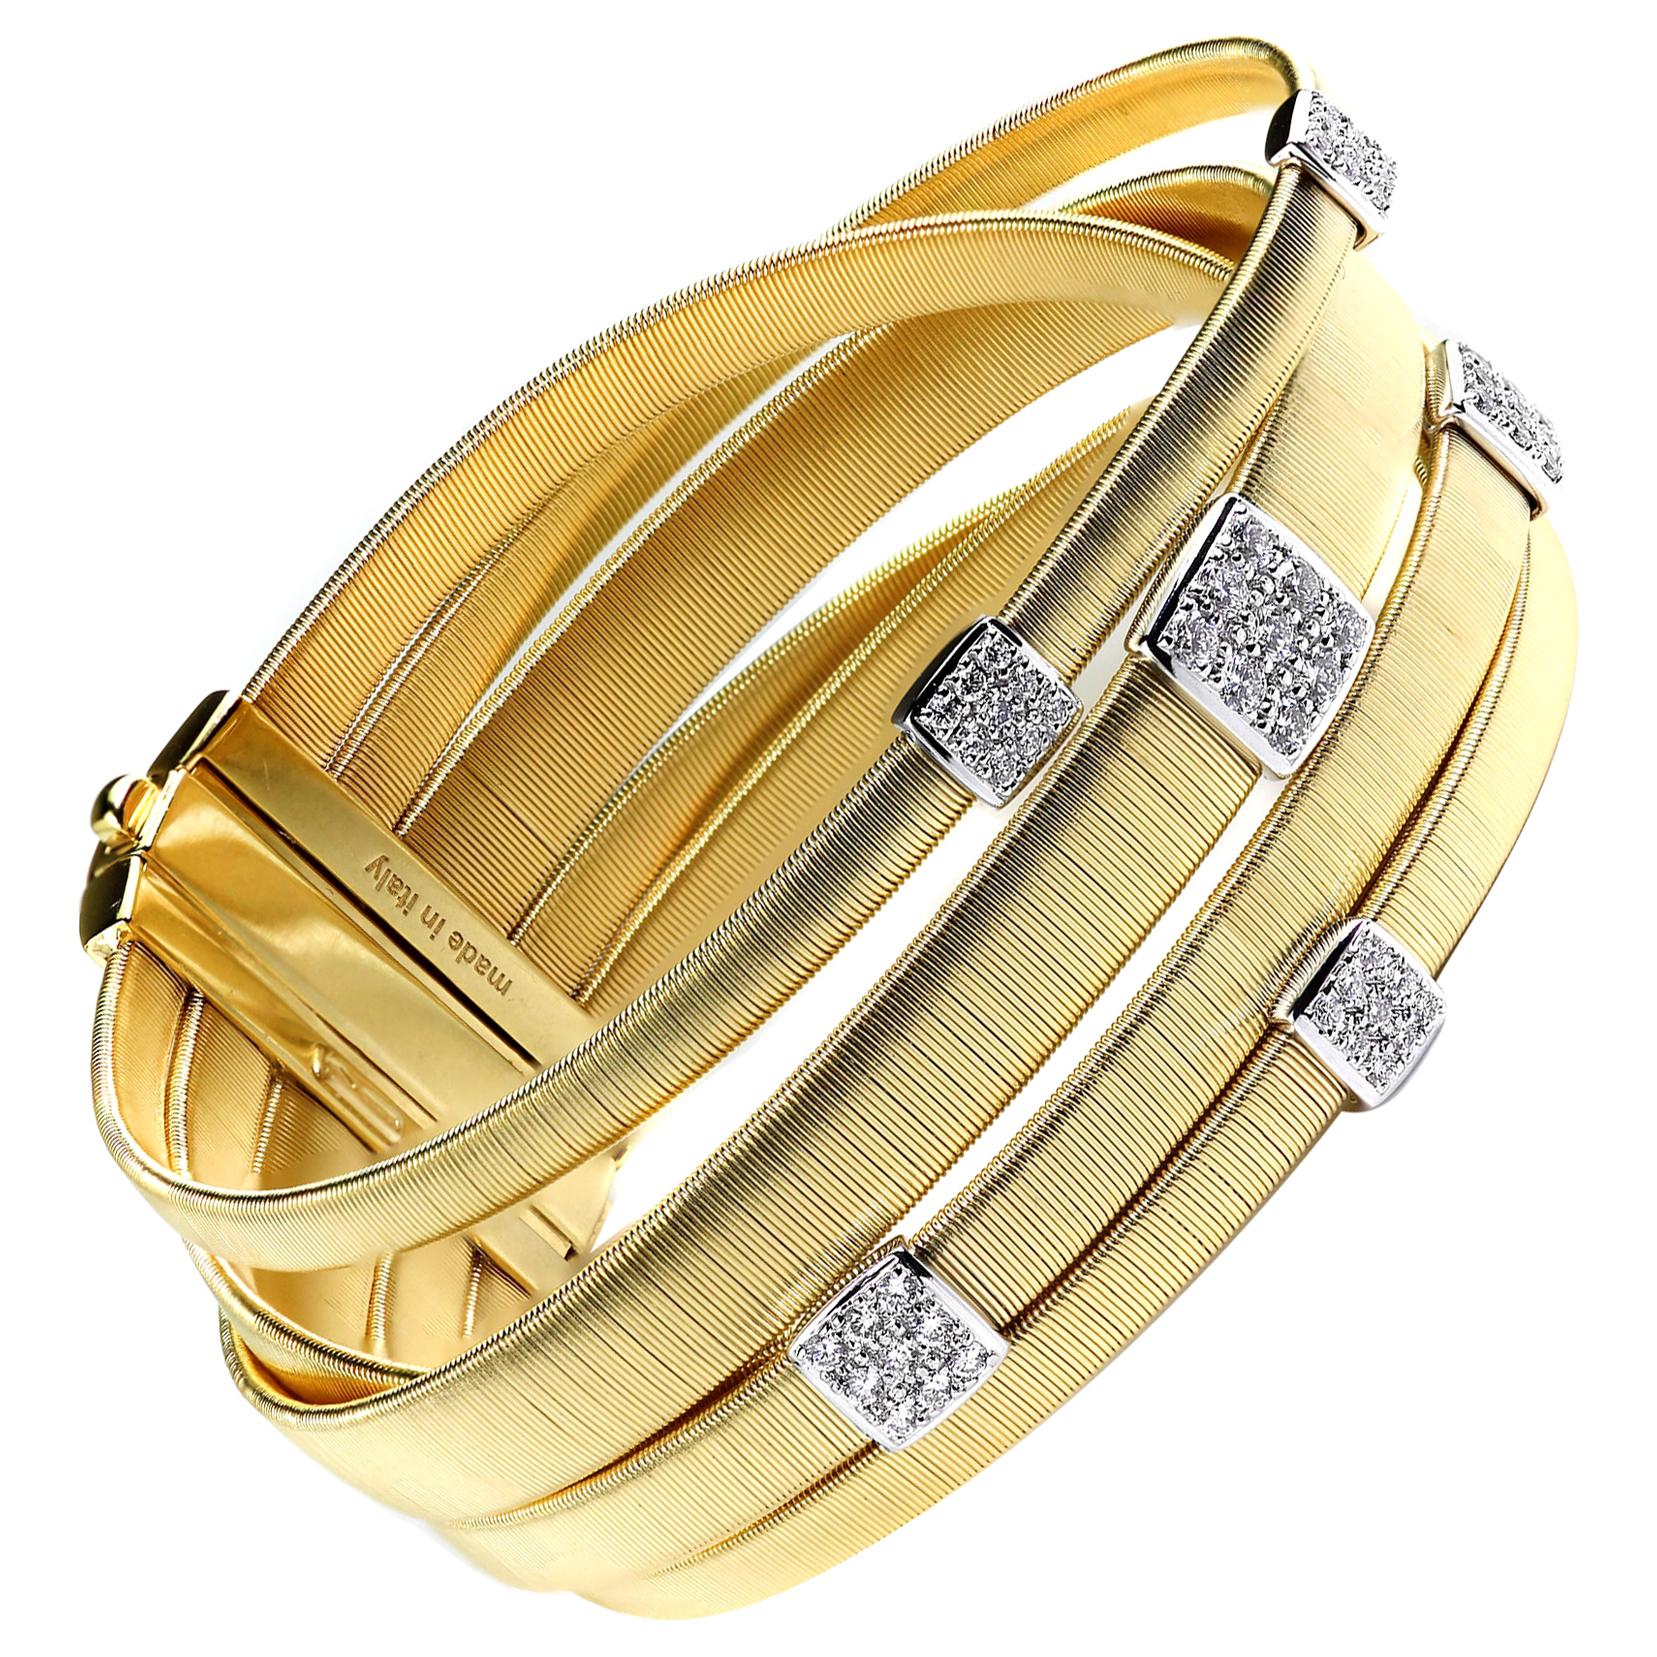 Marco Bicego Five-Strand Maisai Bracelet with Diamonds in Yellow and White Gold